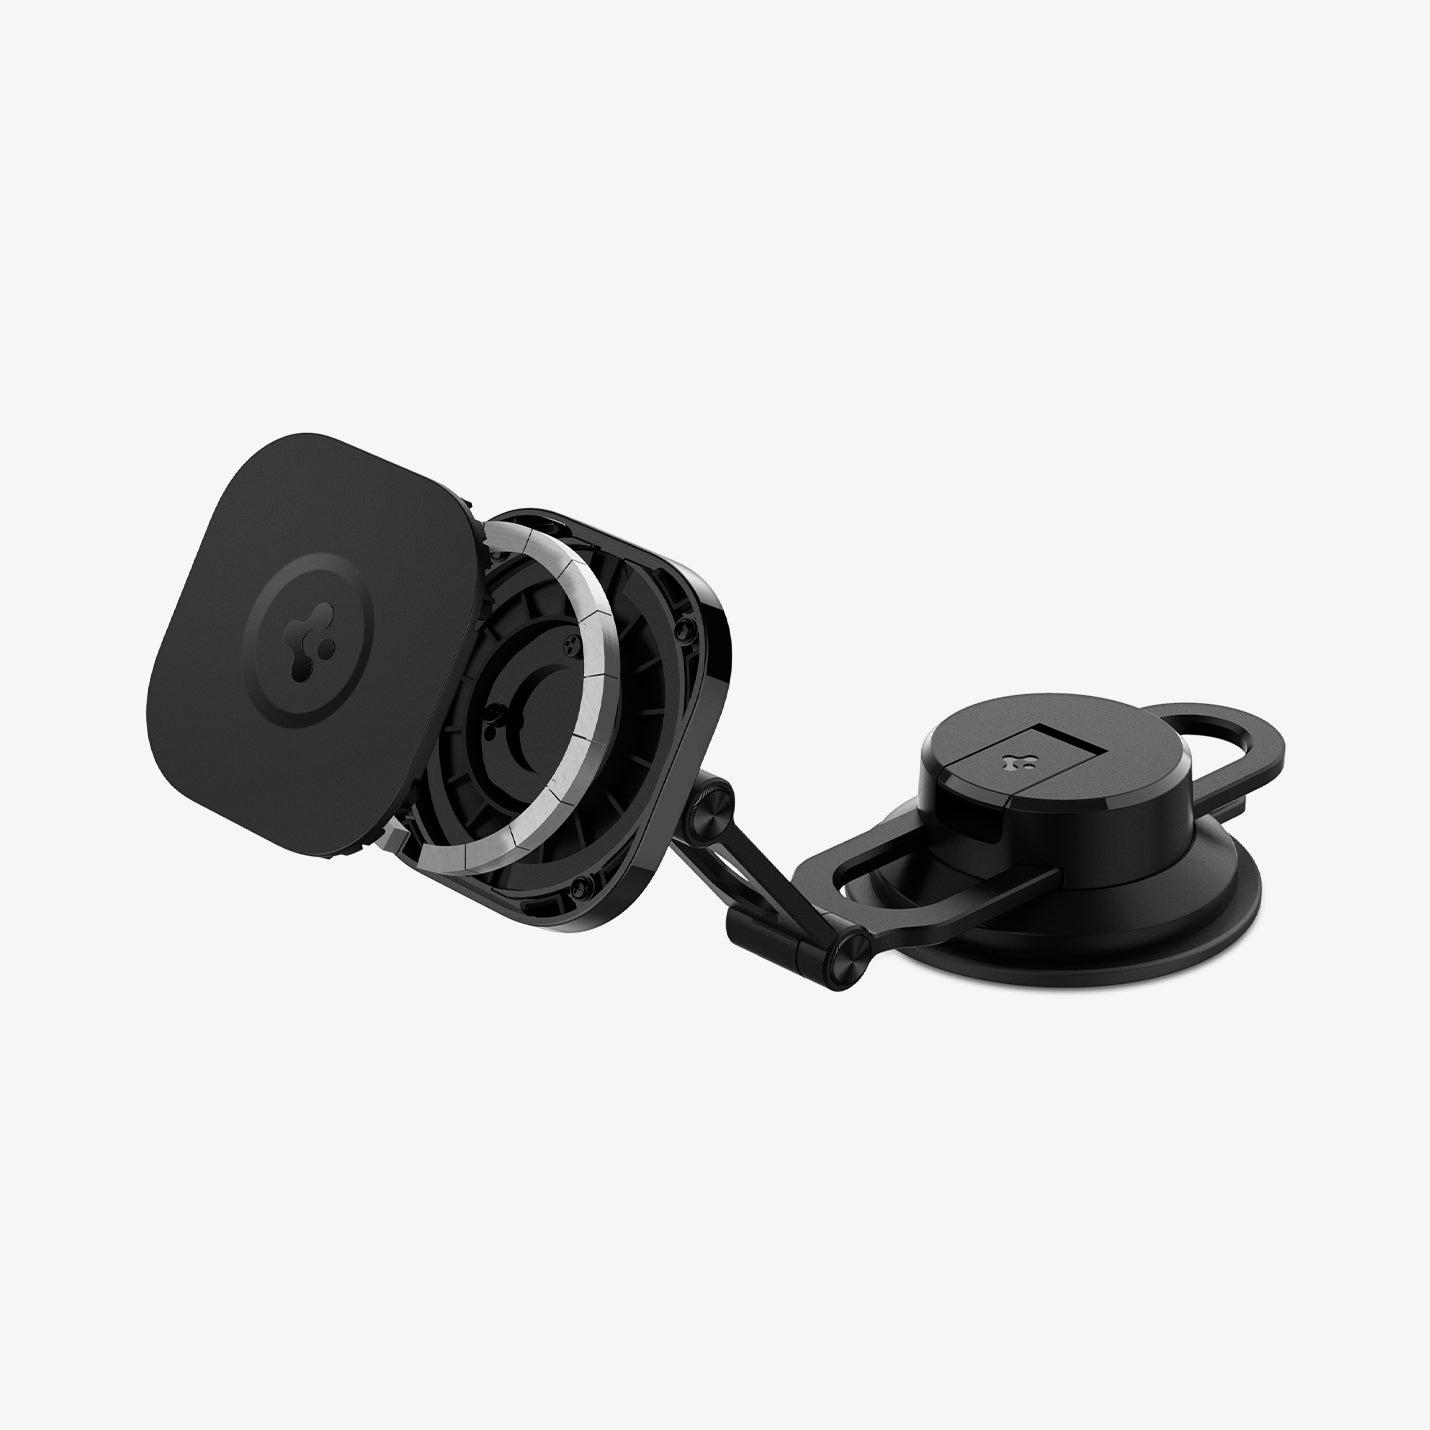 ACP04630 - OneTap 3 Black Dash/Wind Magnetic Car Mount (MagFit) in black showing the magnetic layers of mount